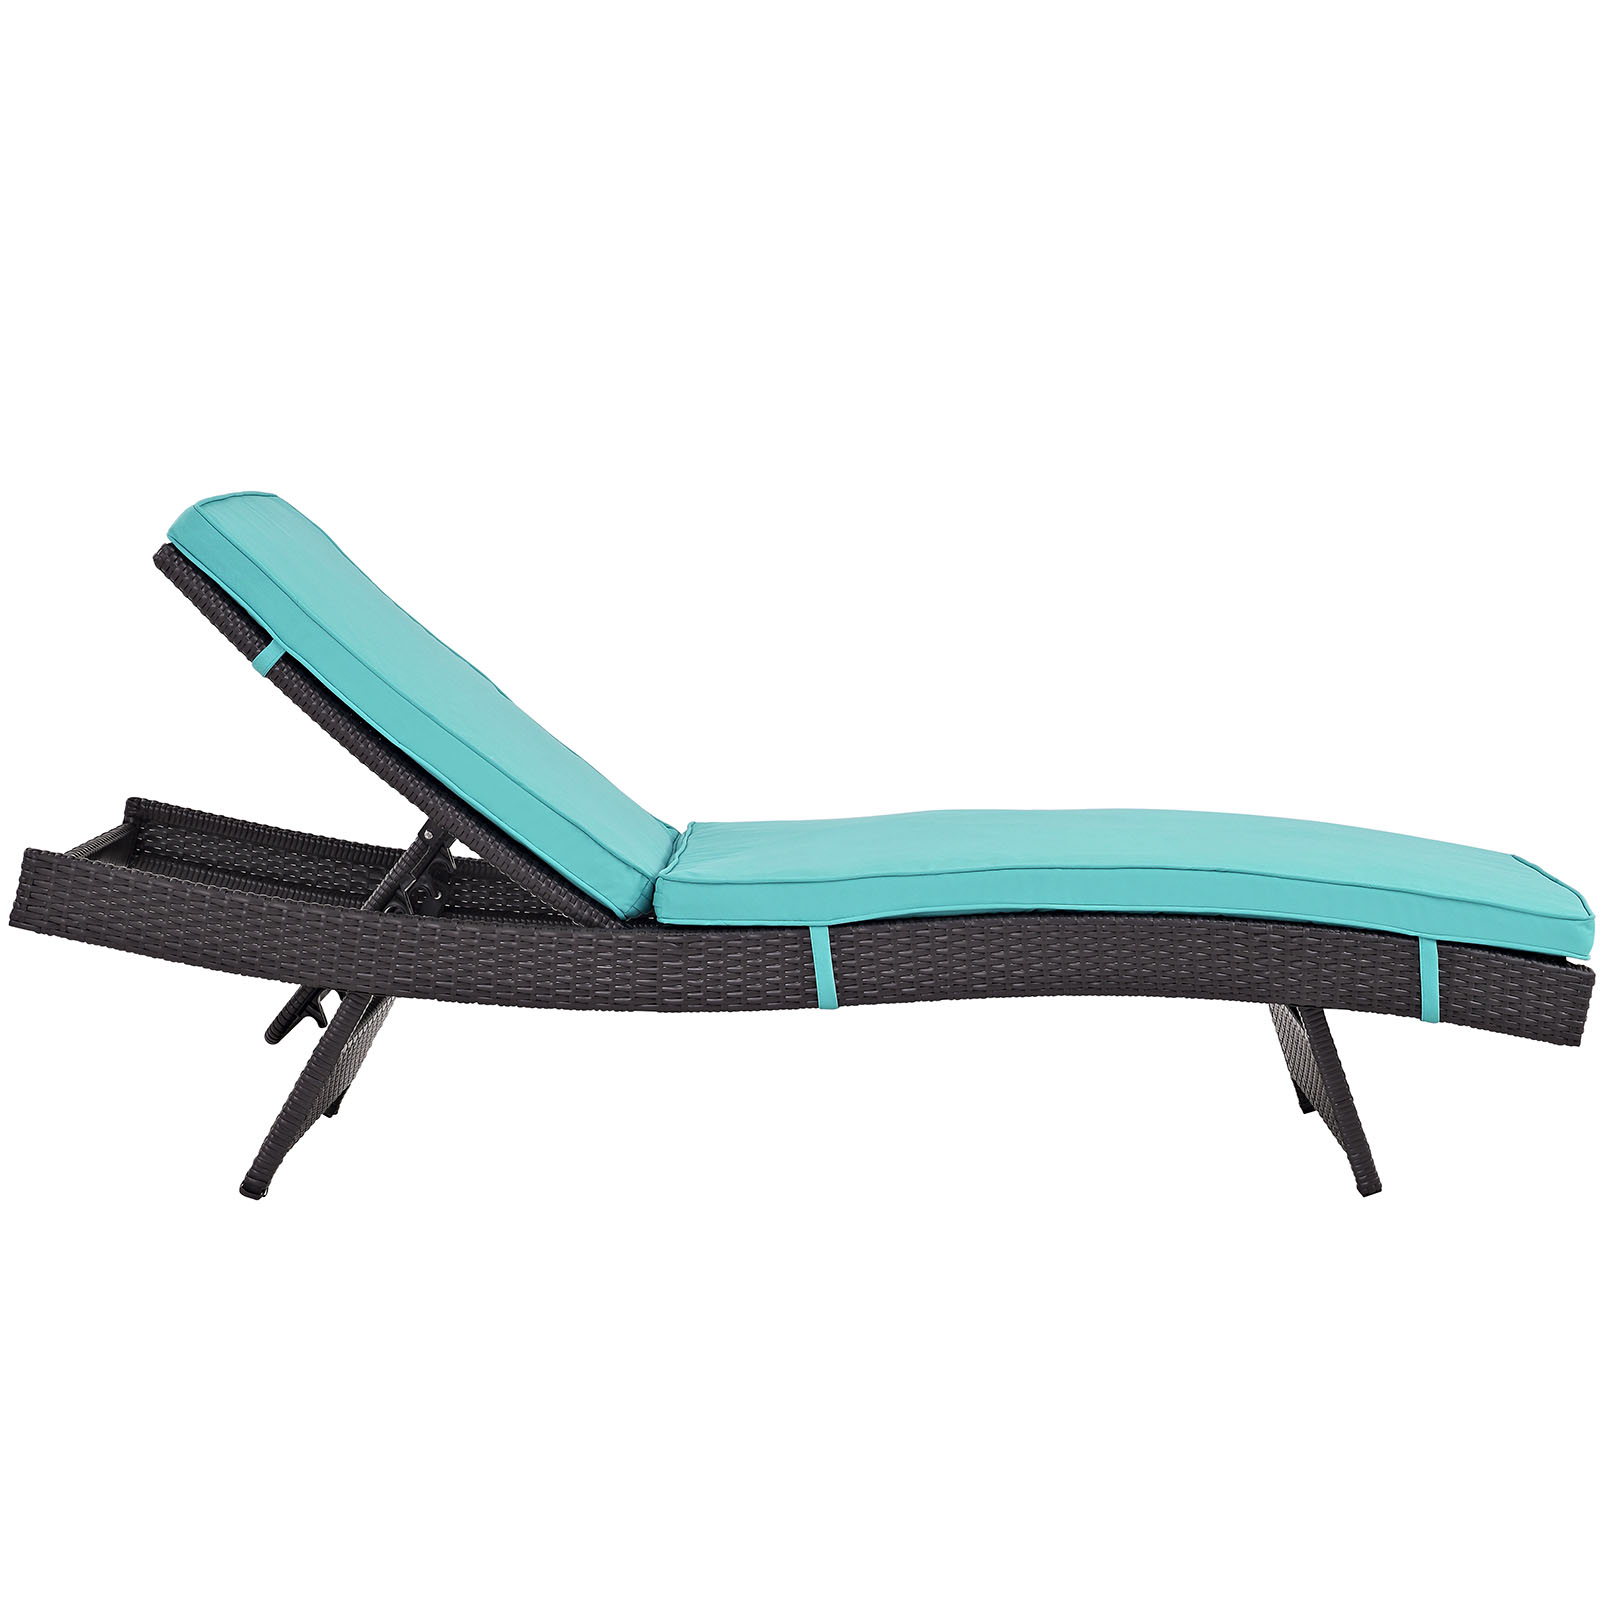 Modway Convene Chaise Outdoor Patio Set of 4 in Espresso Turquoise - image 4 of 5